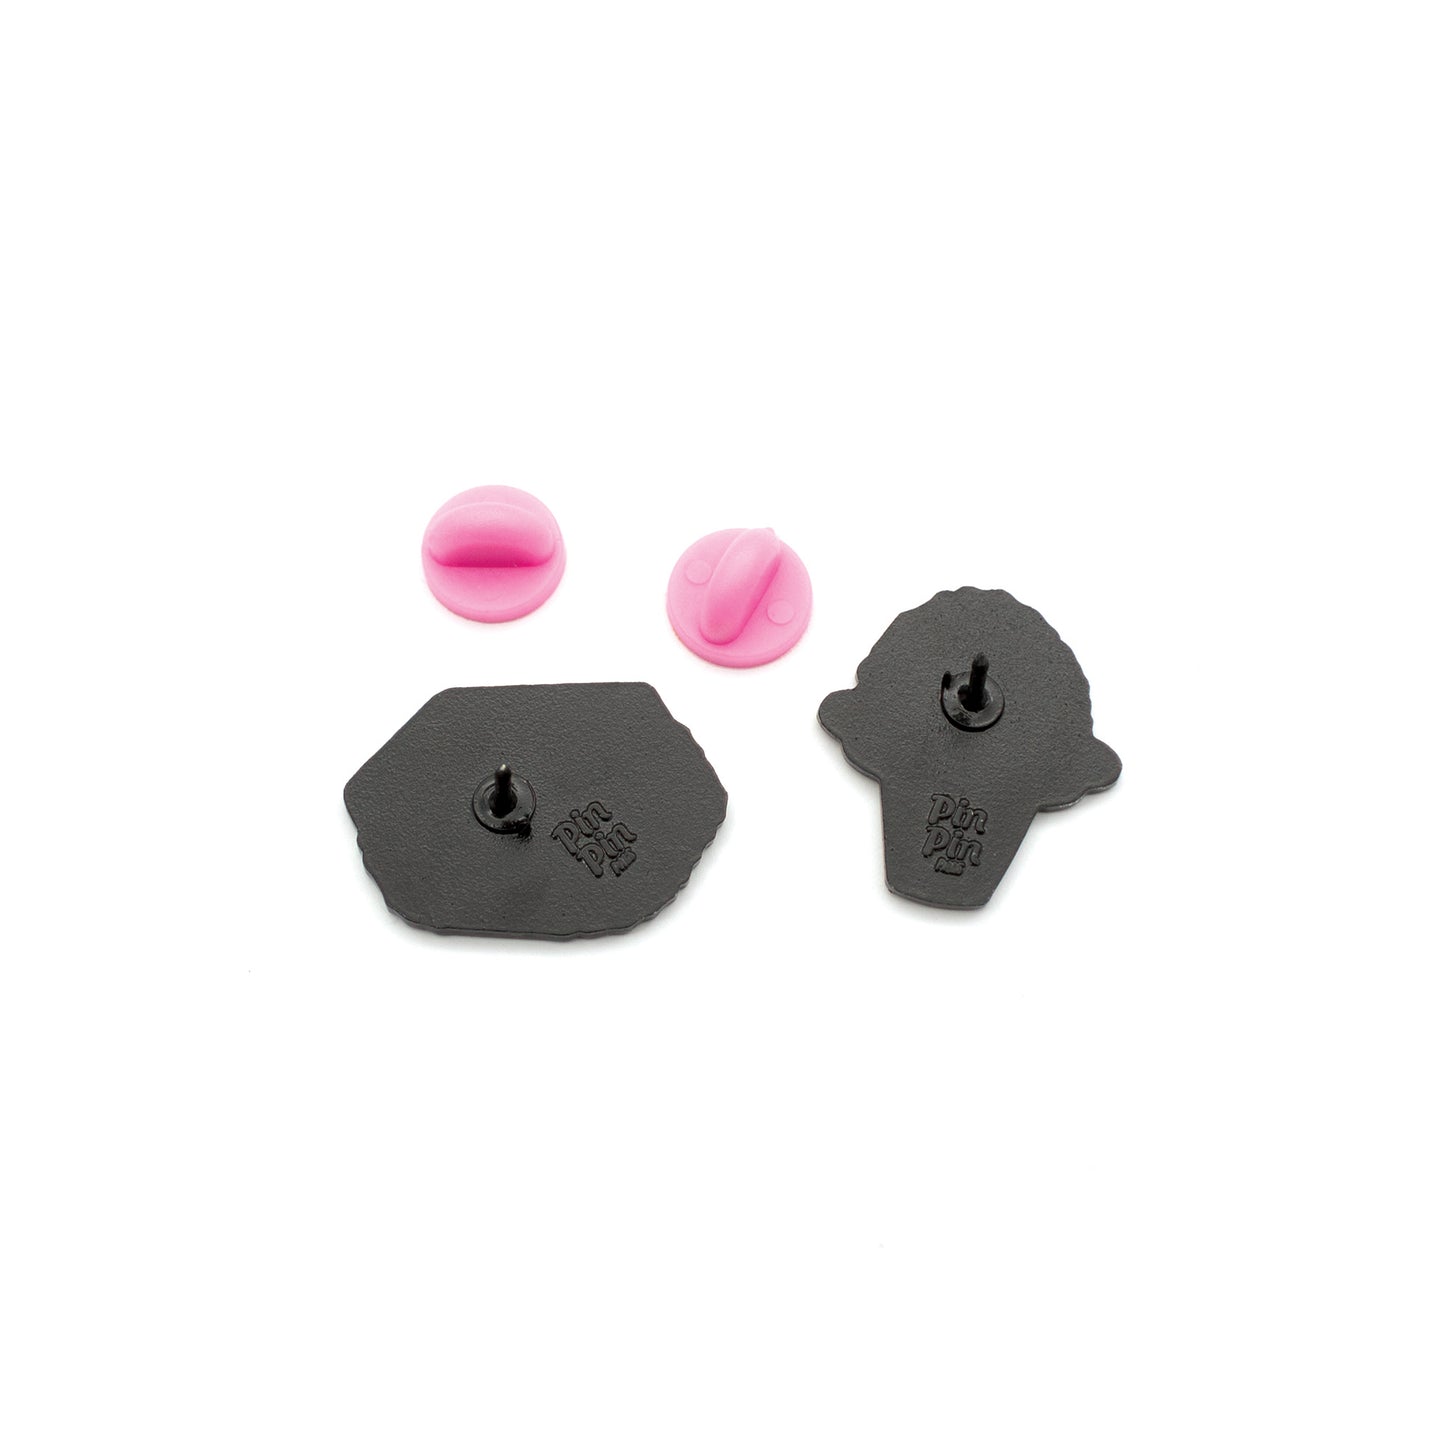 Backs of Spam Musubi and Shaved Ice enamel pins with pink rubber backings